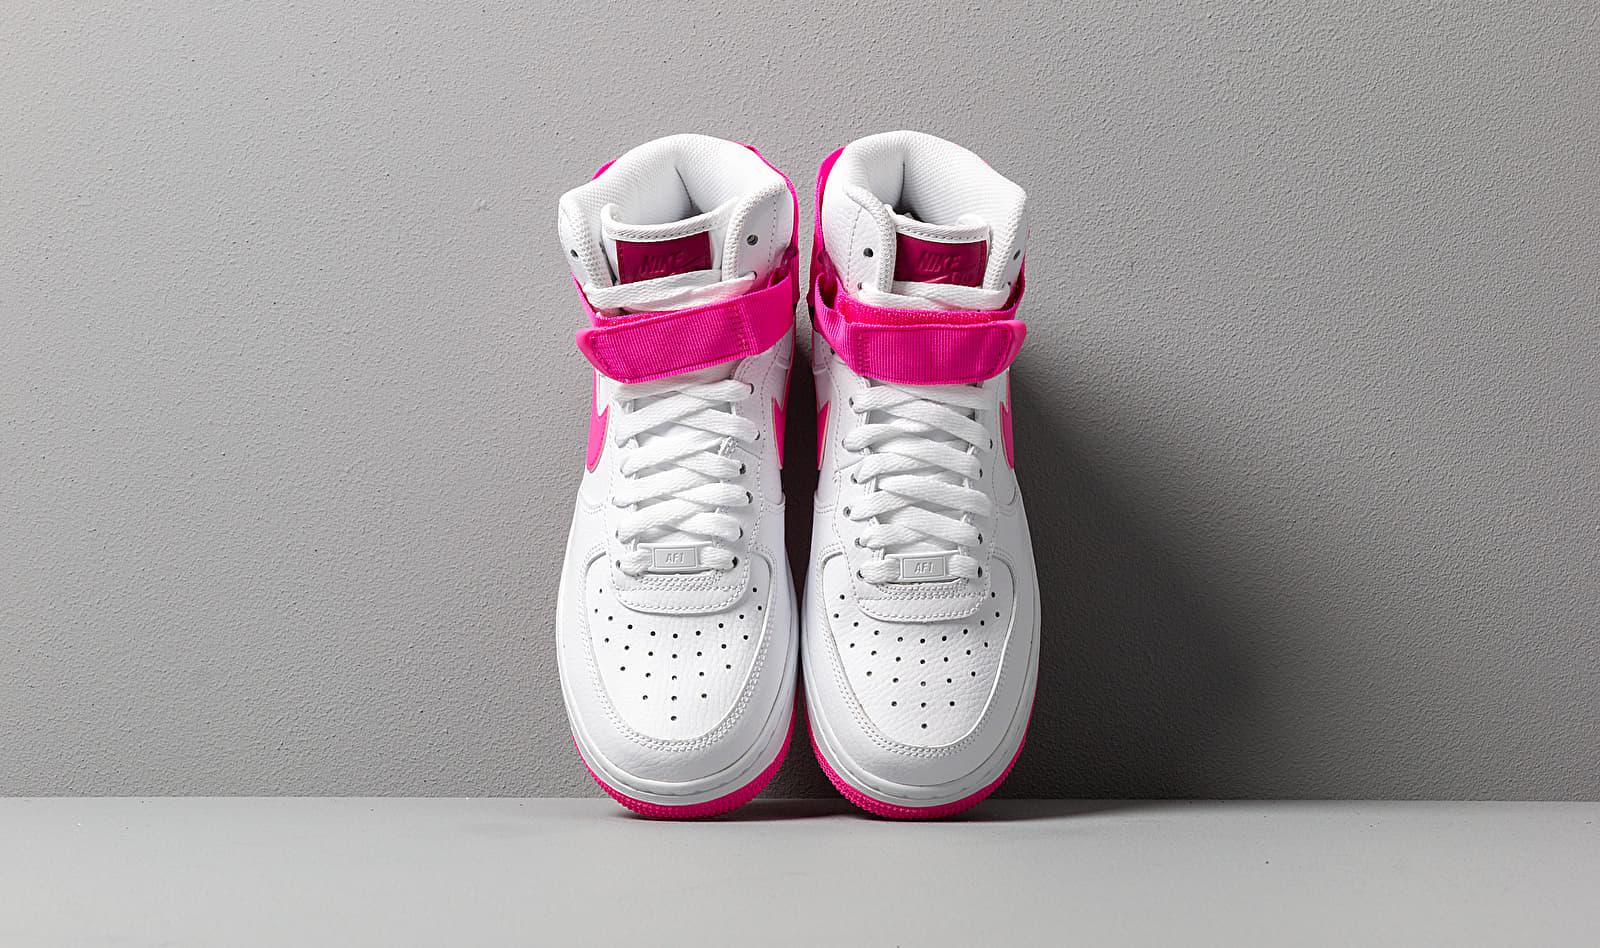 entonces intencional cicatriz Nike Wmns Air Force 1 High Basketball Shoes in White | Lyst